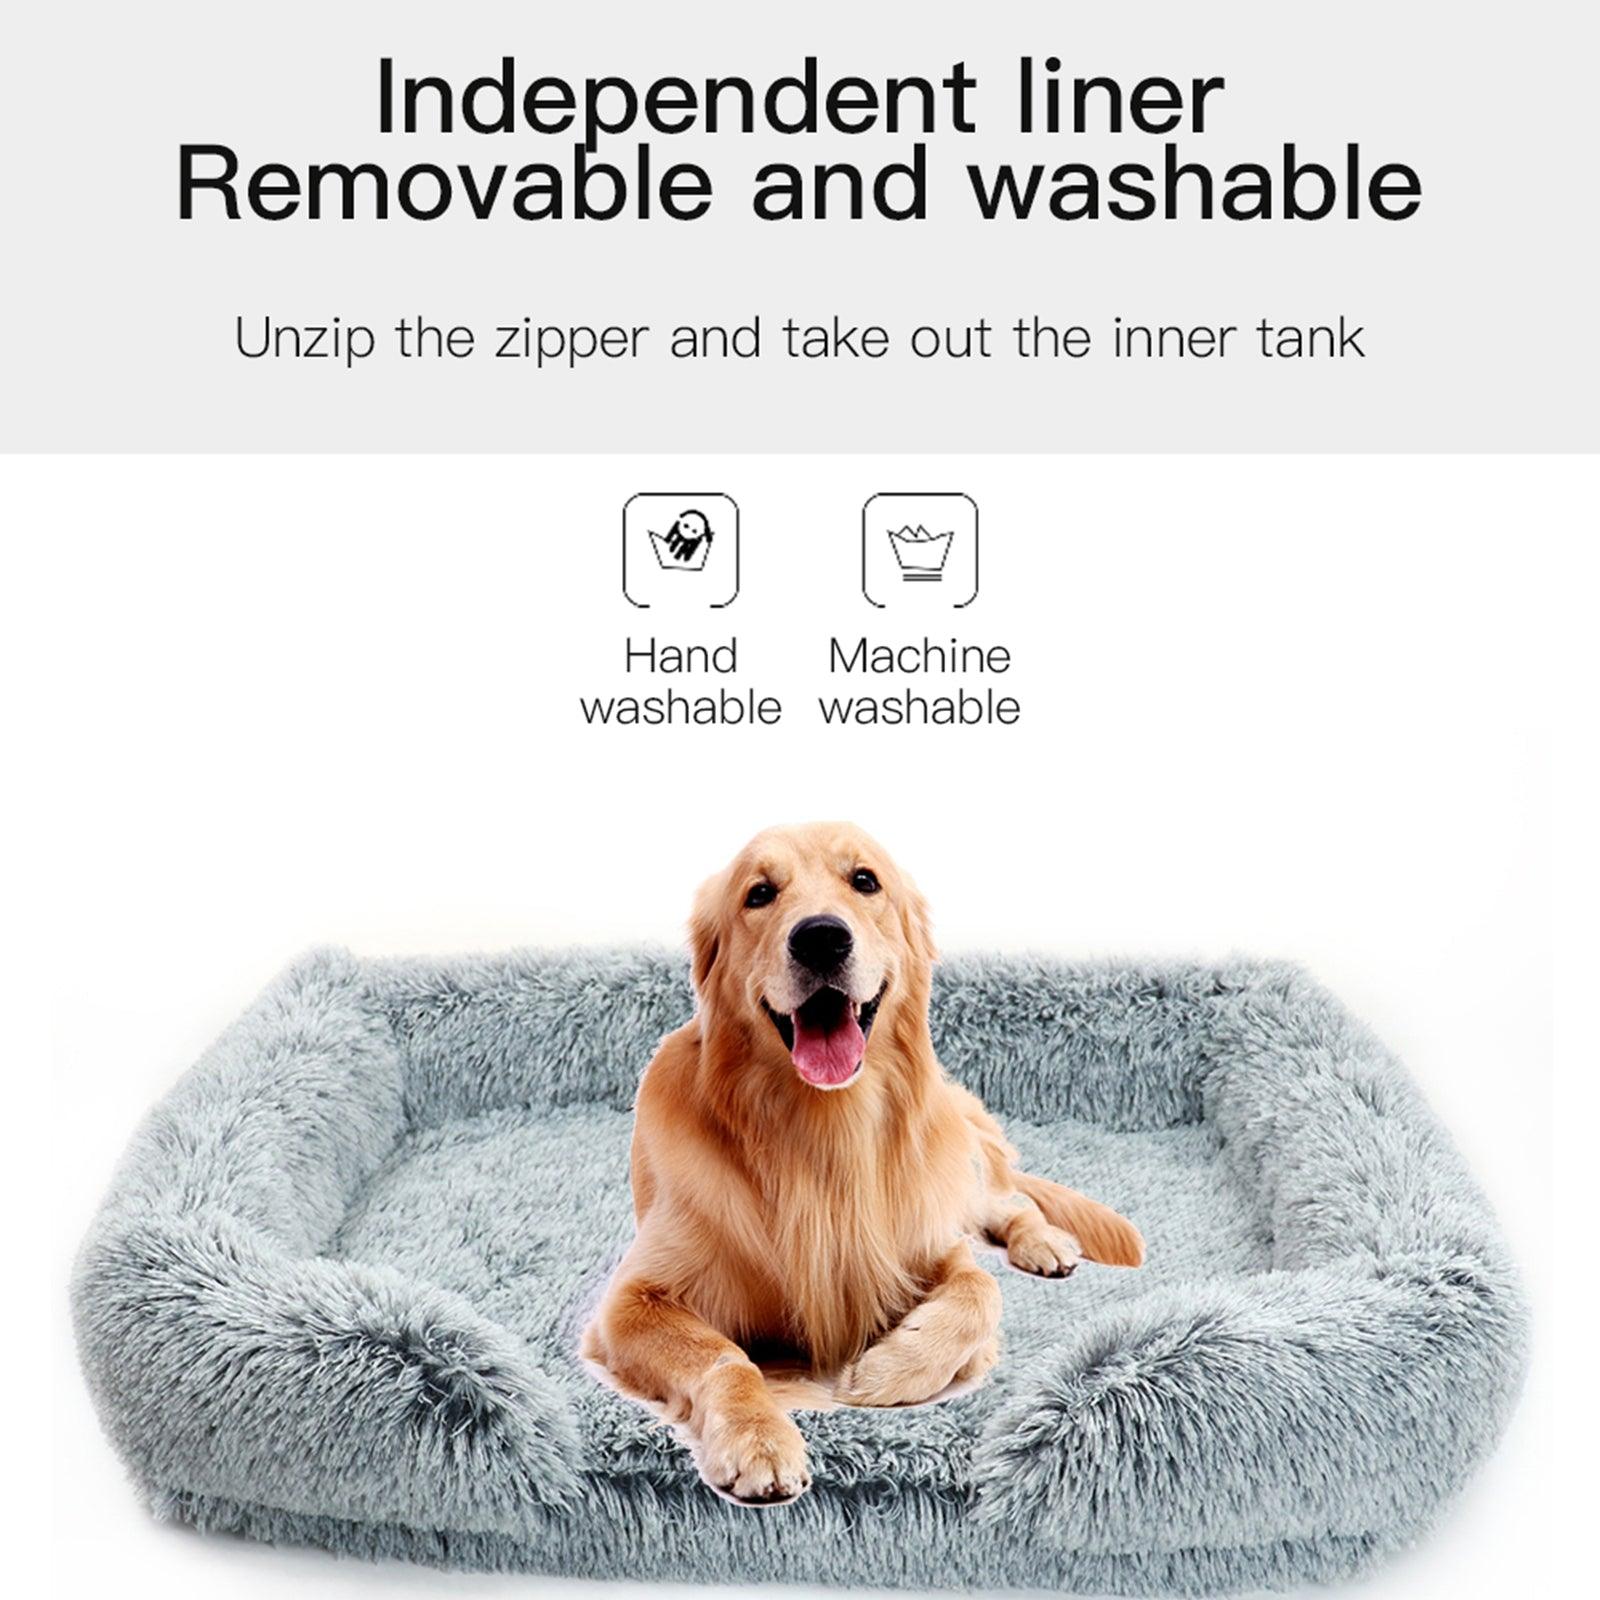 Pet Dog Comfort Bed Plush Bed Comfortable Nest Removable cleaning Kennel L